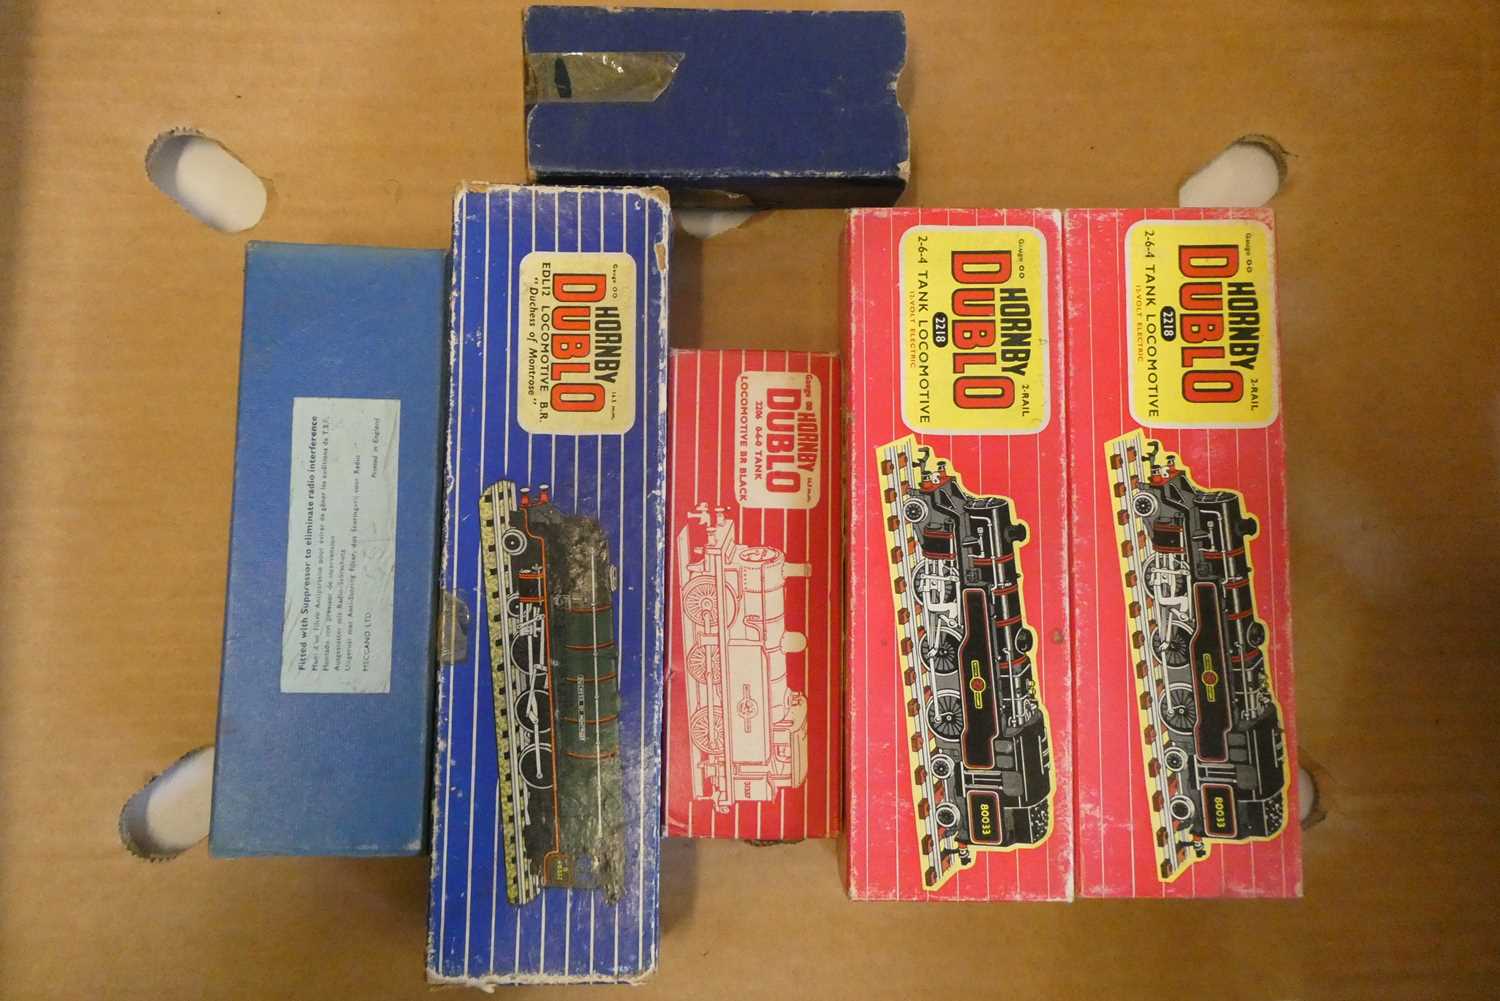 Hornby Dublo 2 rail locomotives comprising two 2-6-4 Tanks 80033, two bunker sides, 0-6-0 tank